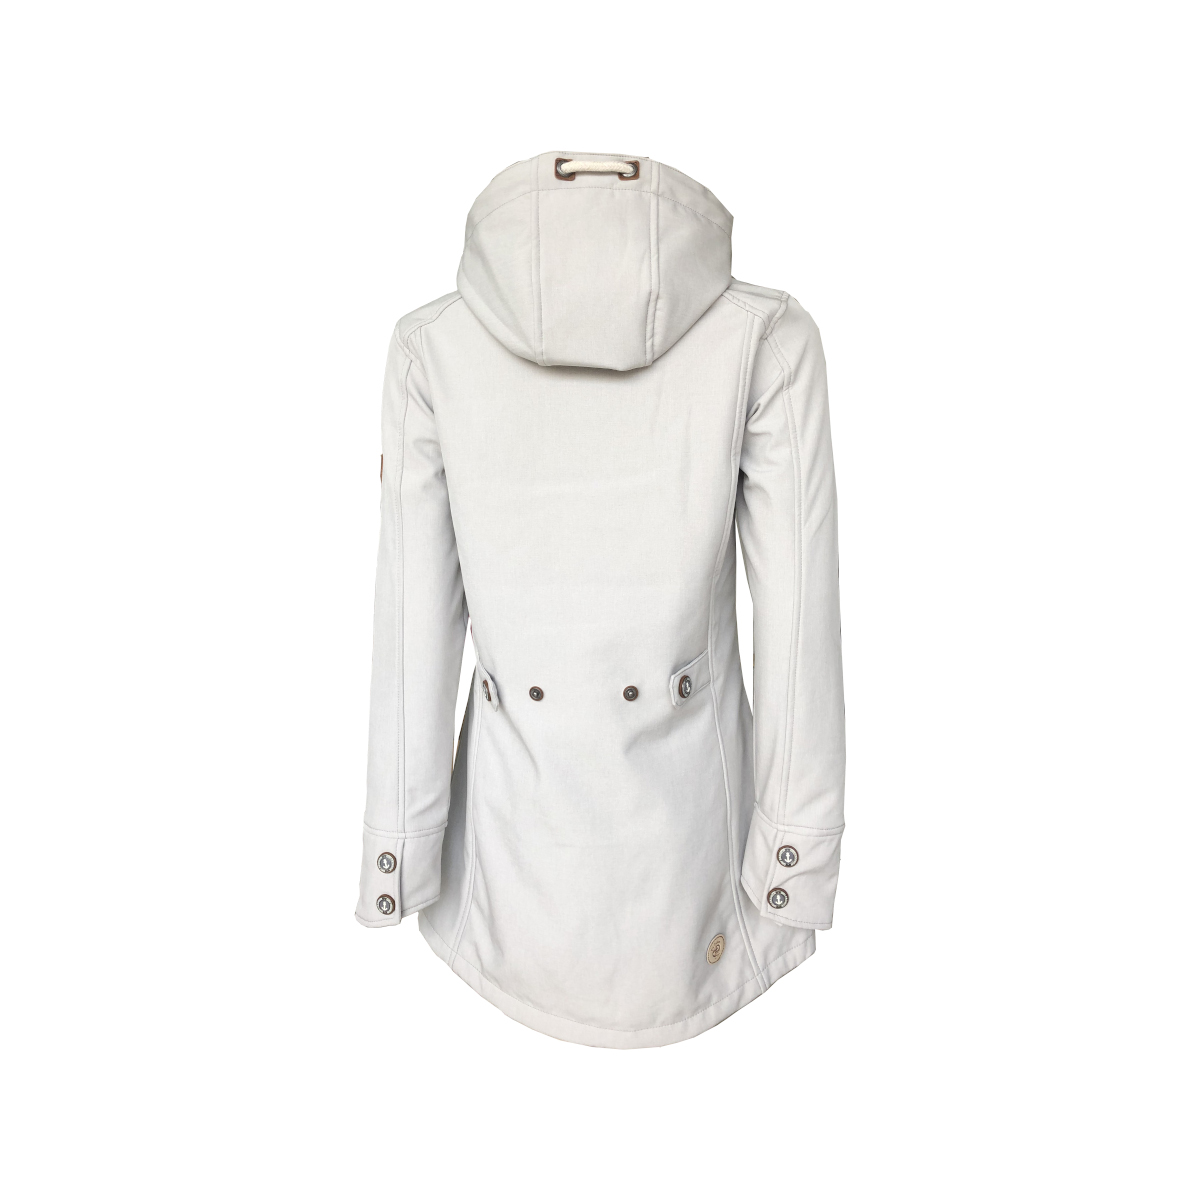 Dry Fashion Sellin Manteau Softshell femme gris clair chiné, taille 36